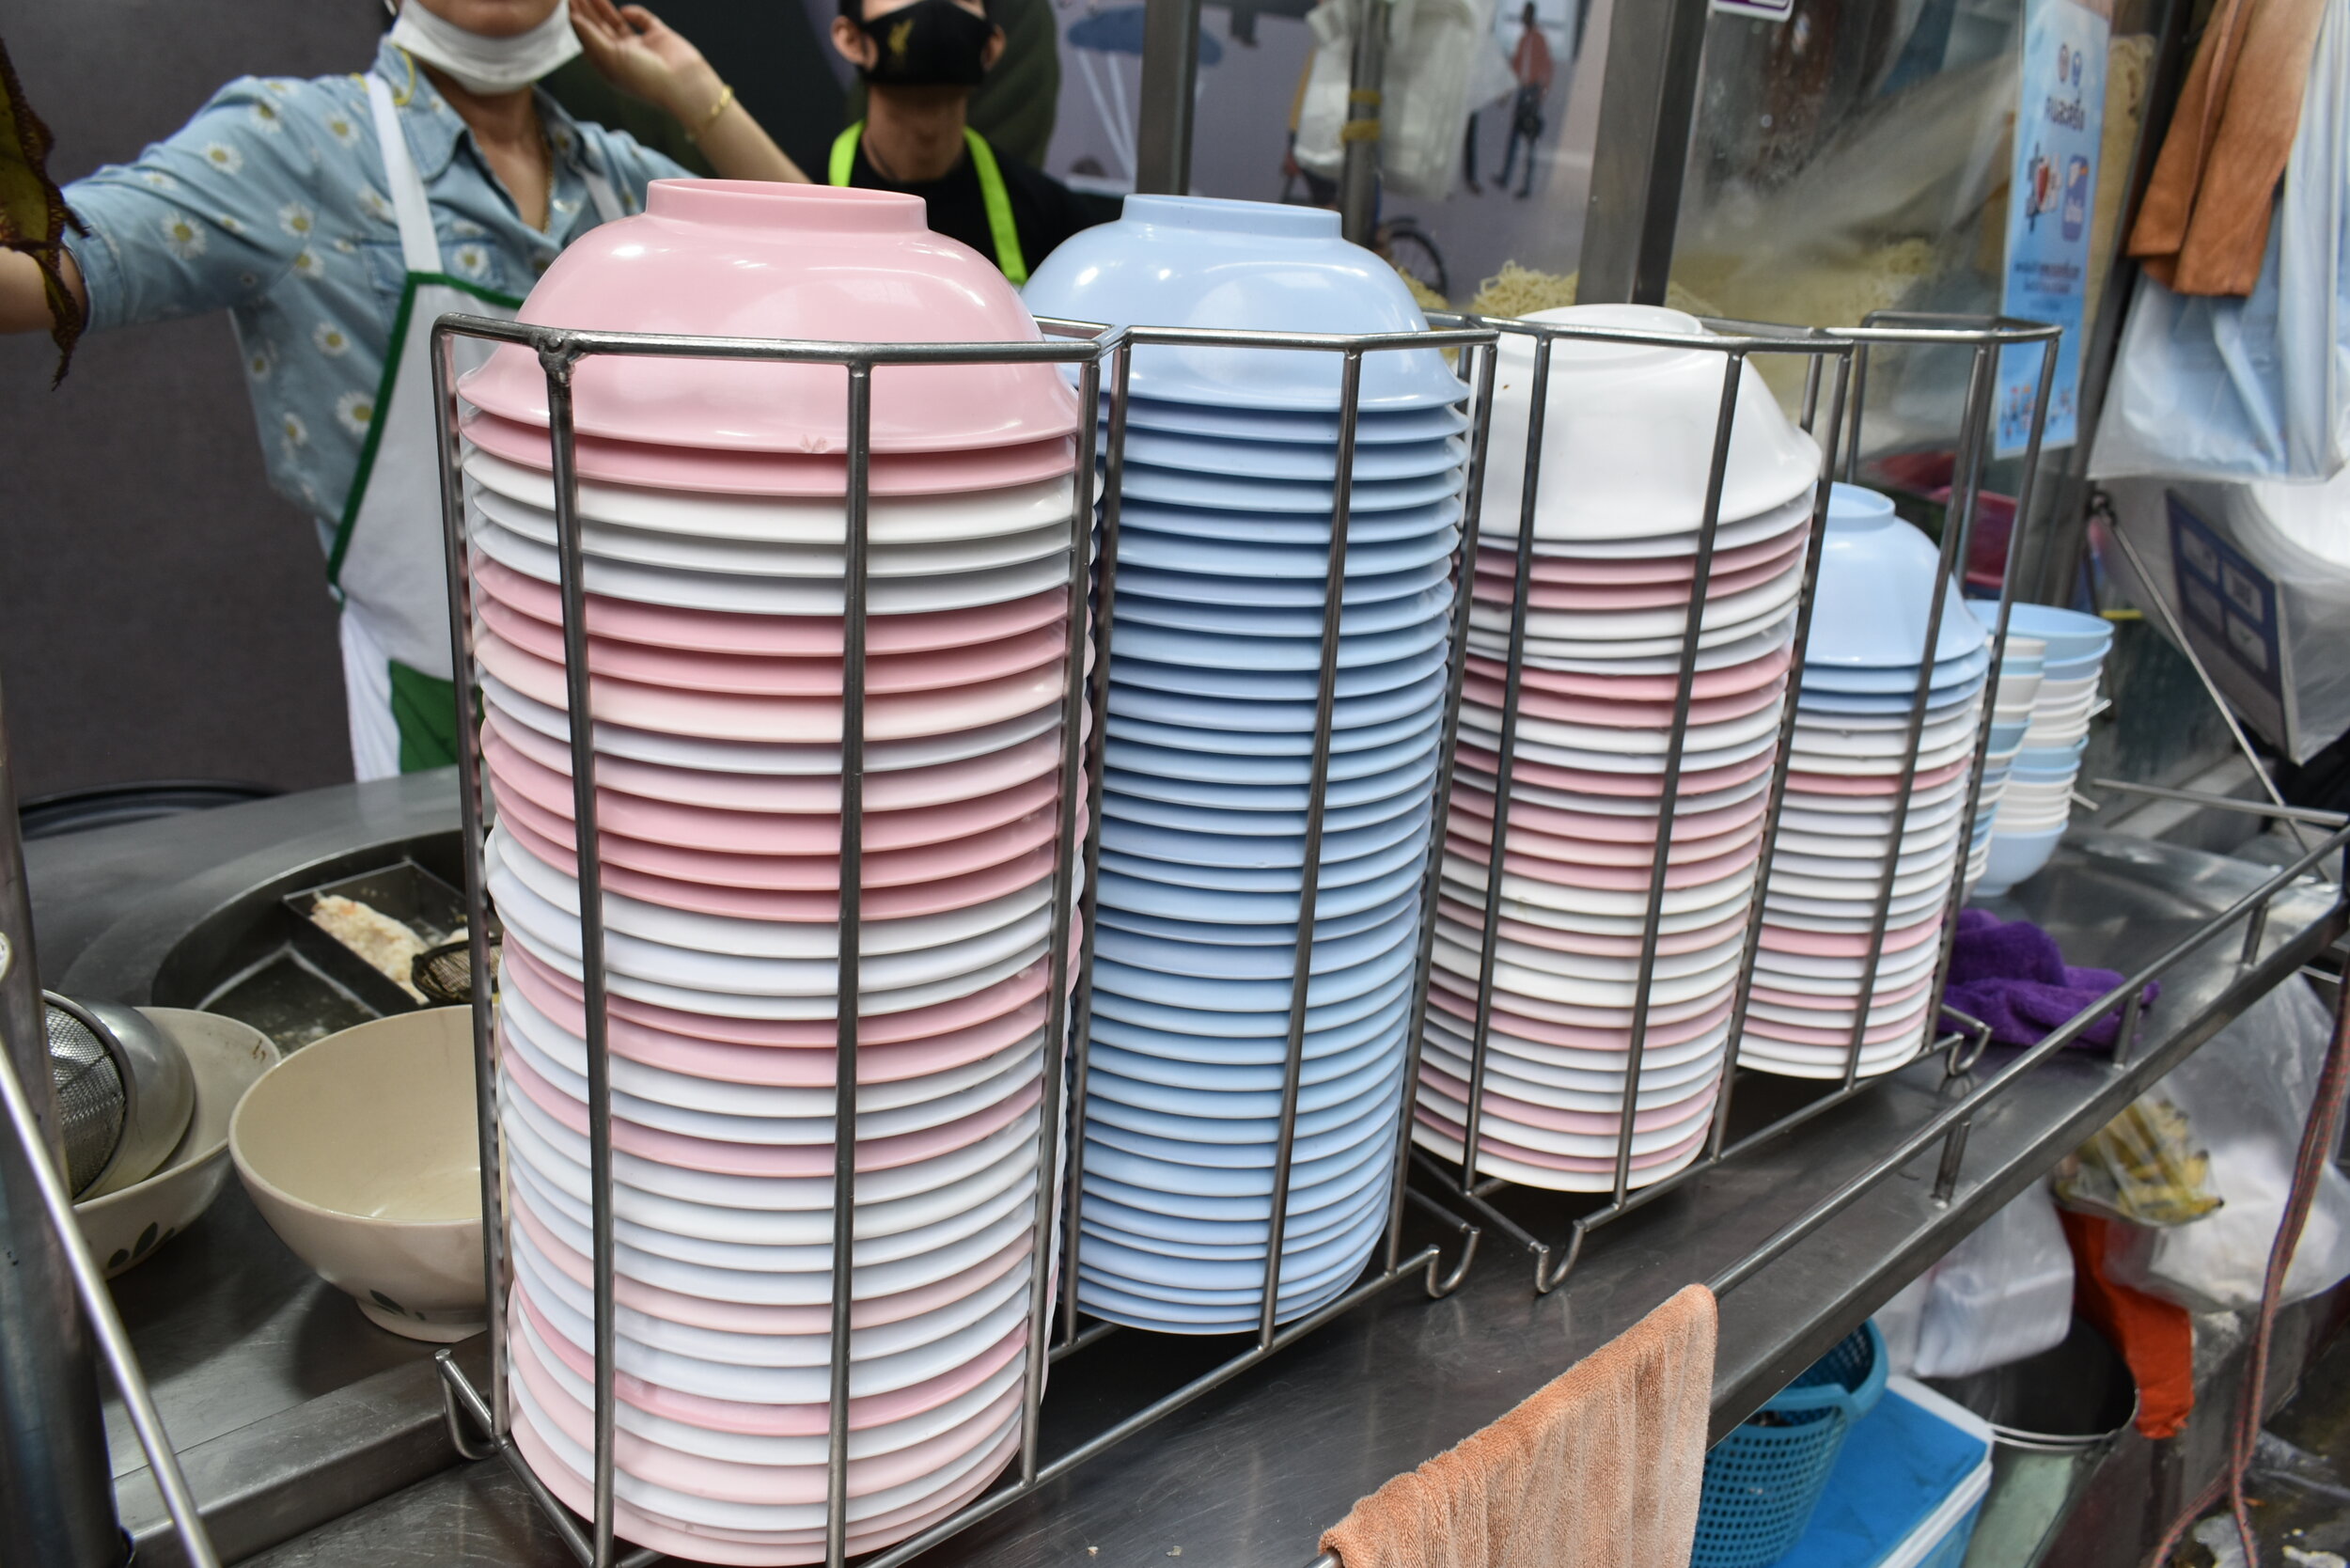 Stacks of food containers10.JPG